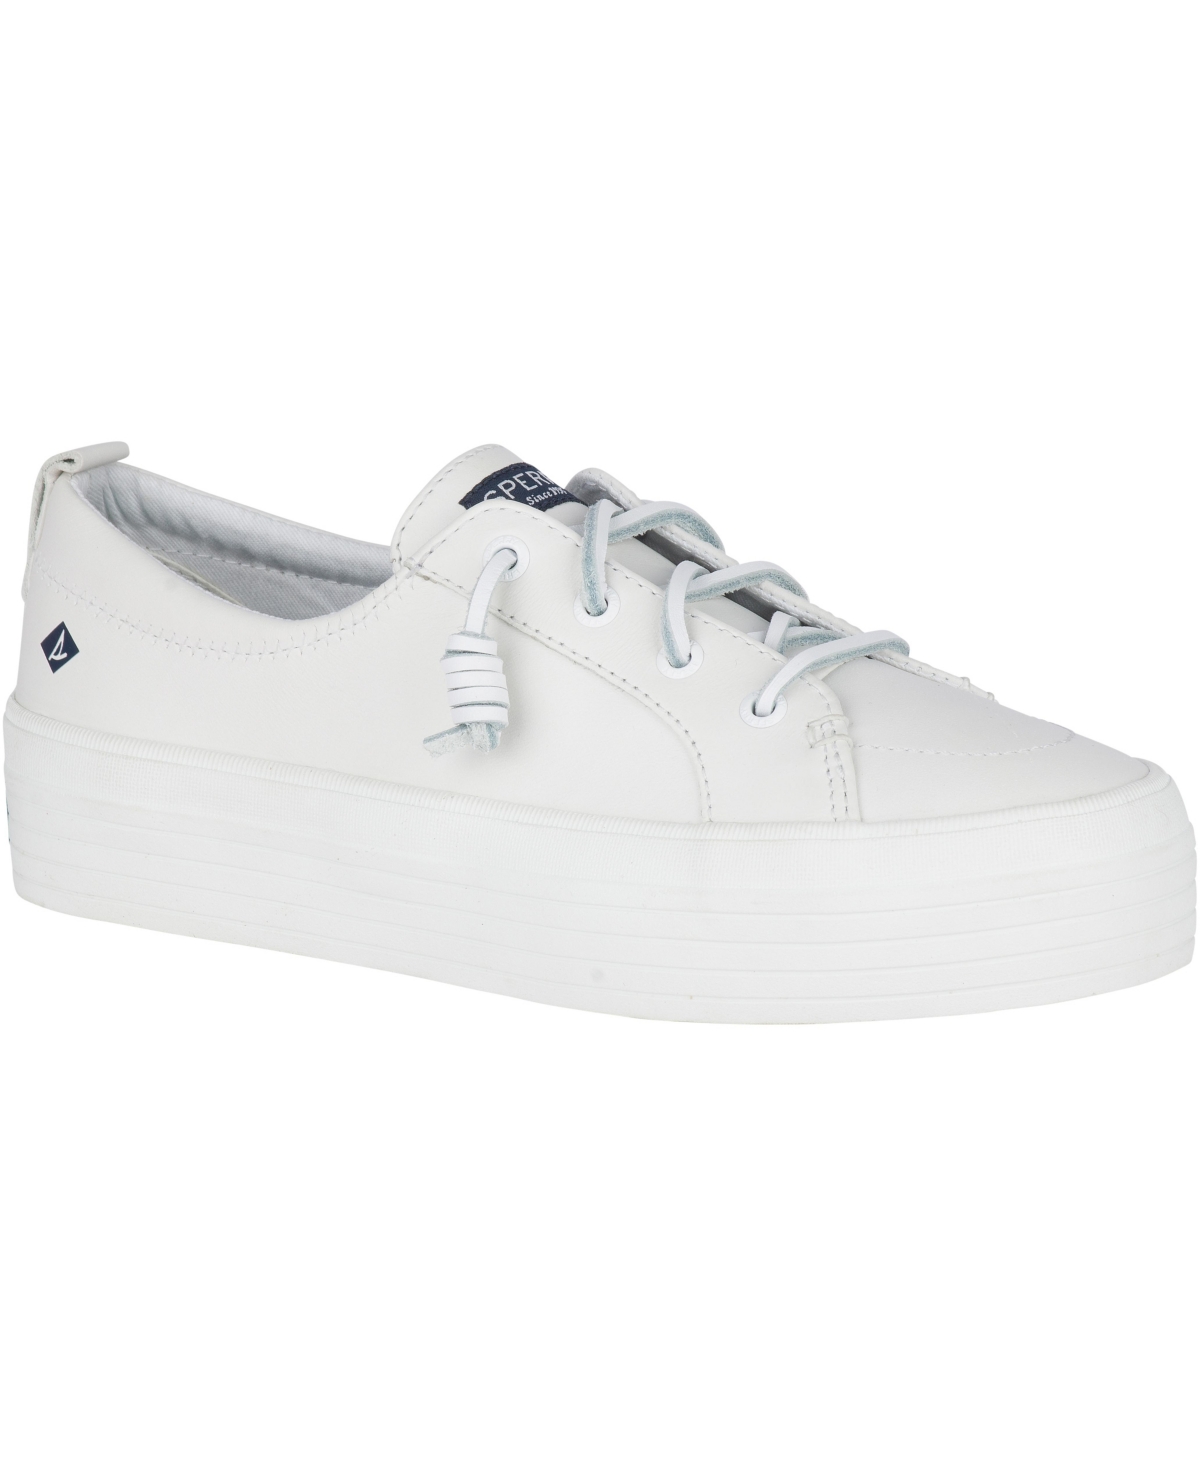 SPERRY WOMEN'S CREST VIBE PLATFORM LEATHER SNEAKERS